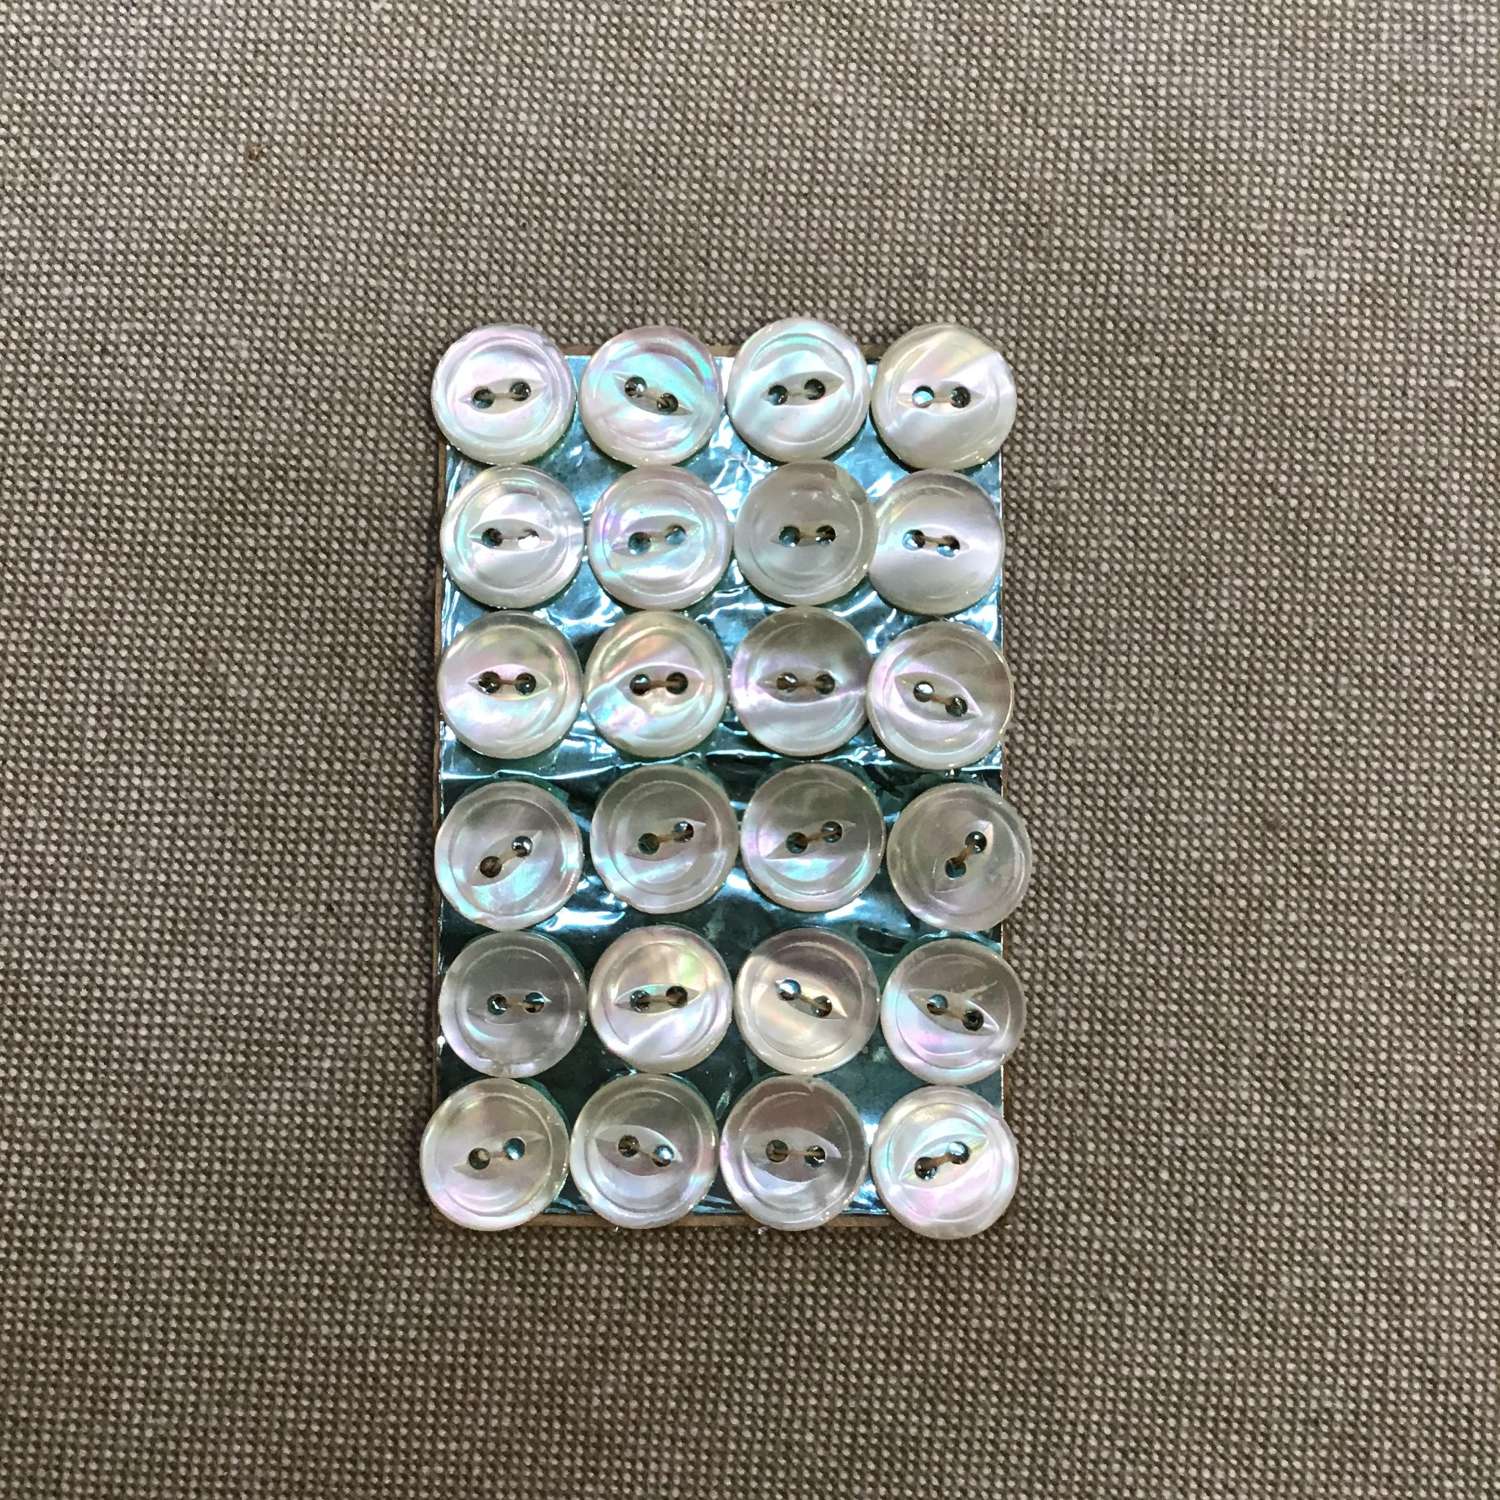 24 mother of pearl buttons 1cm diameter